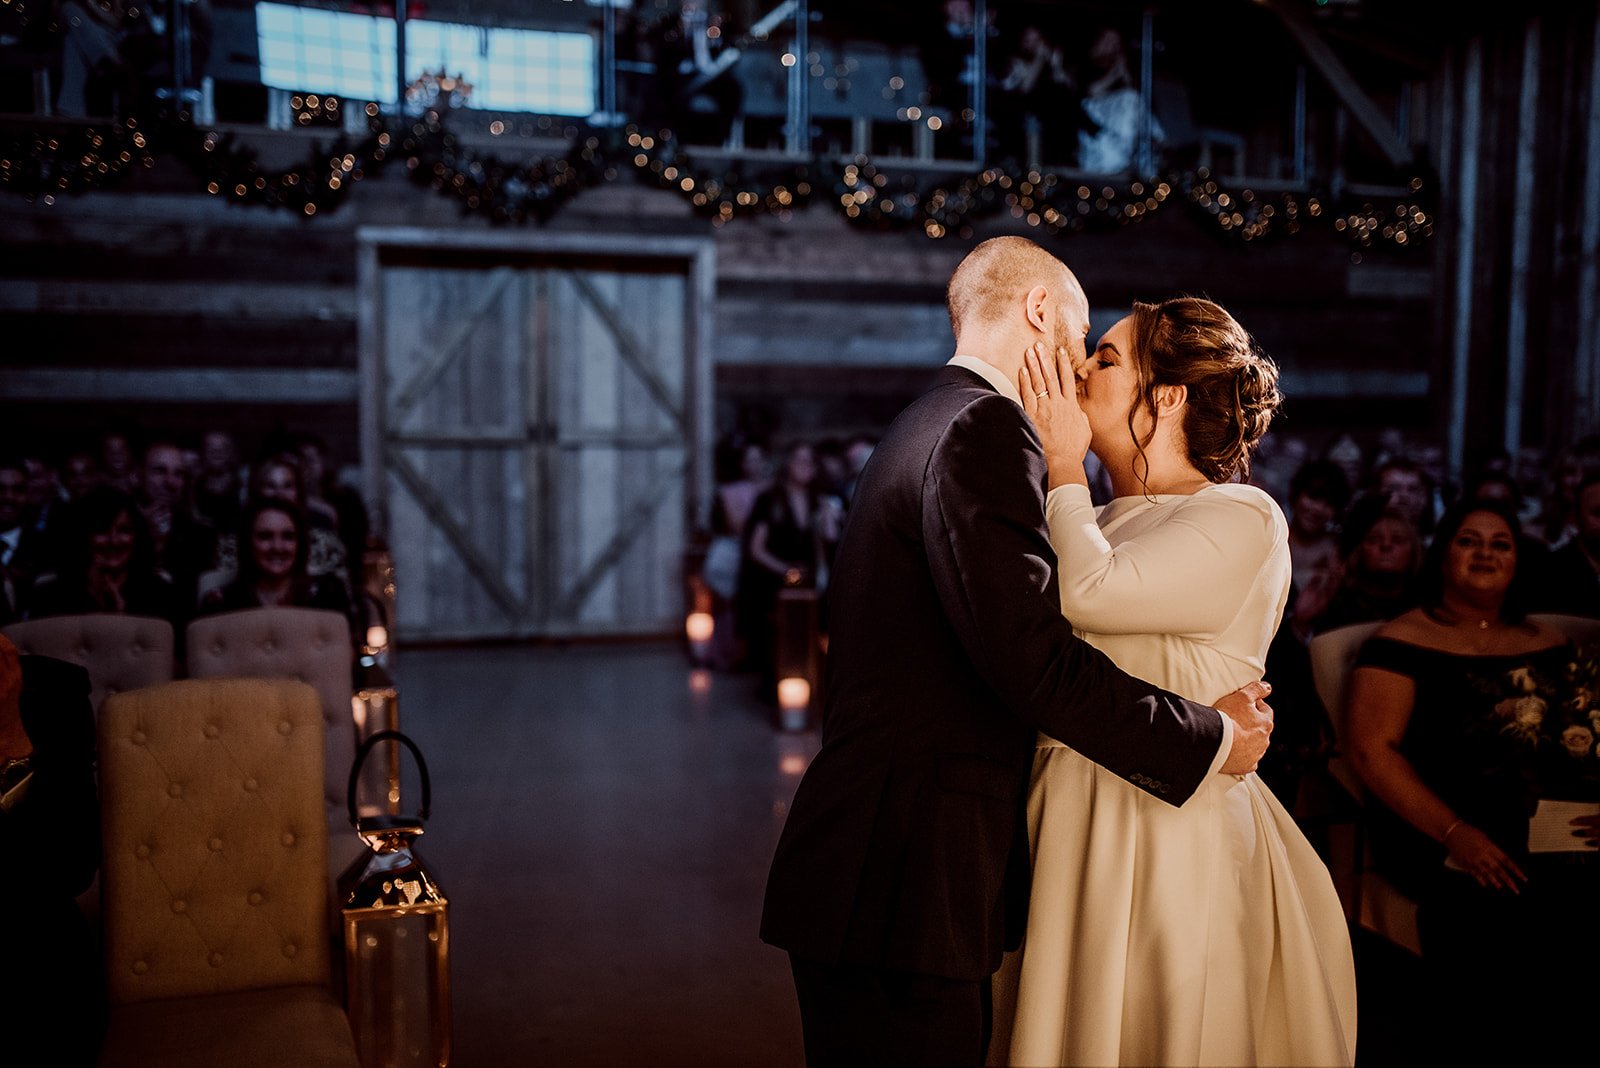 The first kiss at Leeds wedding venue